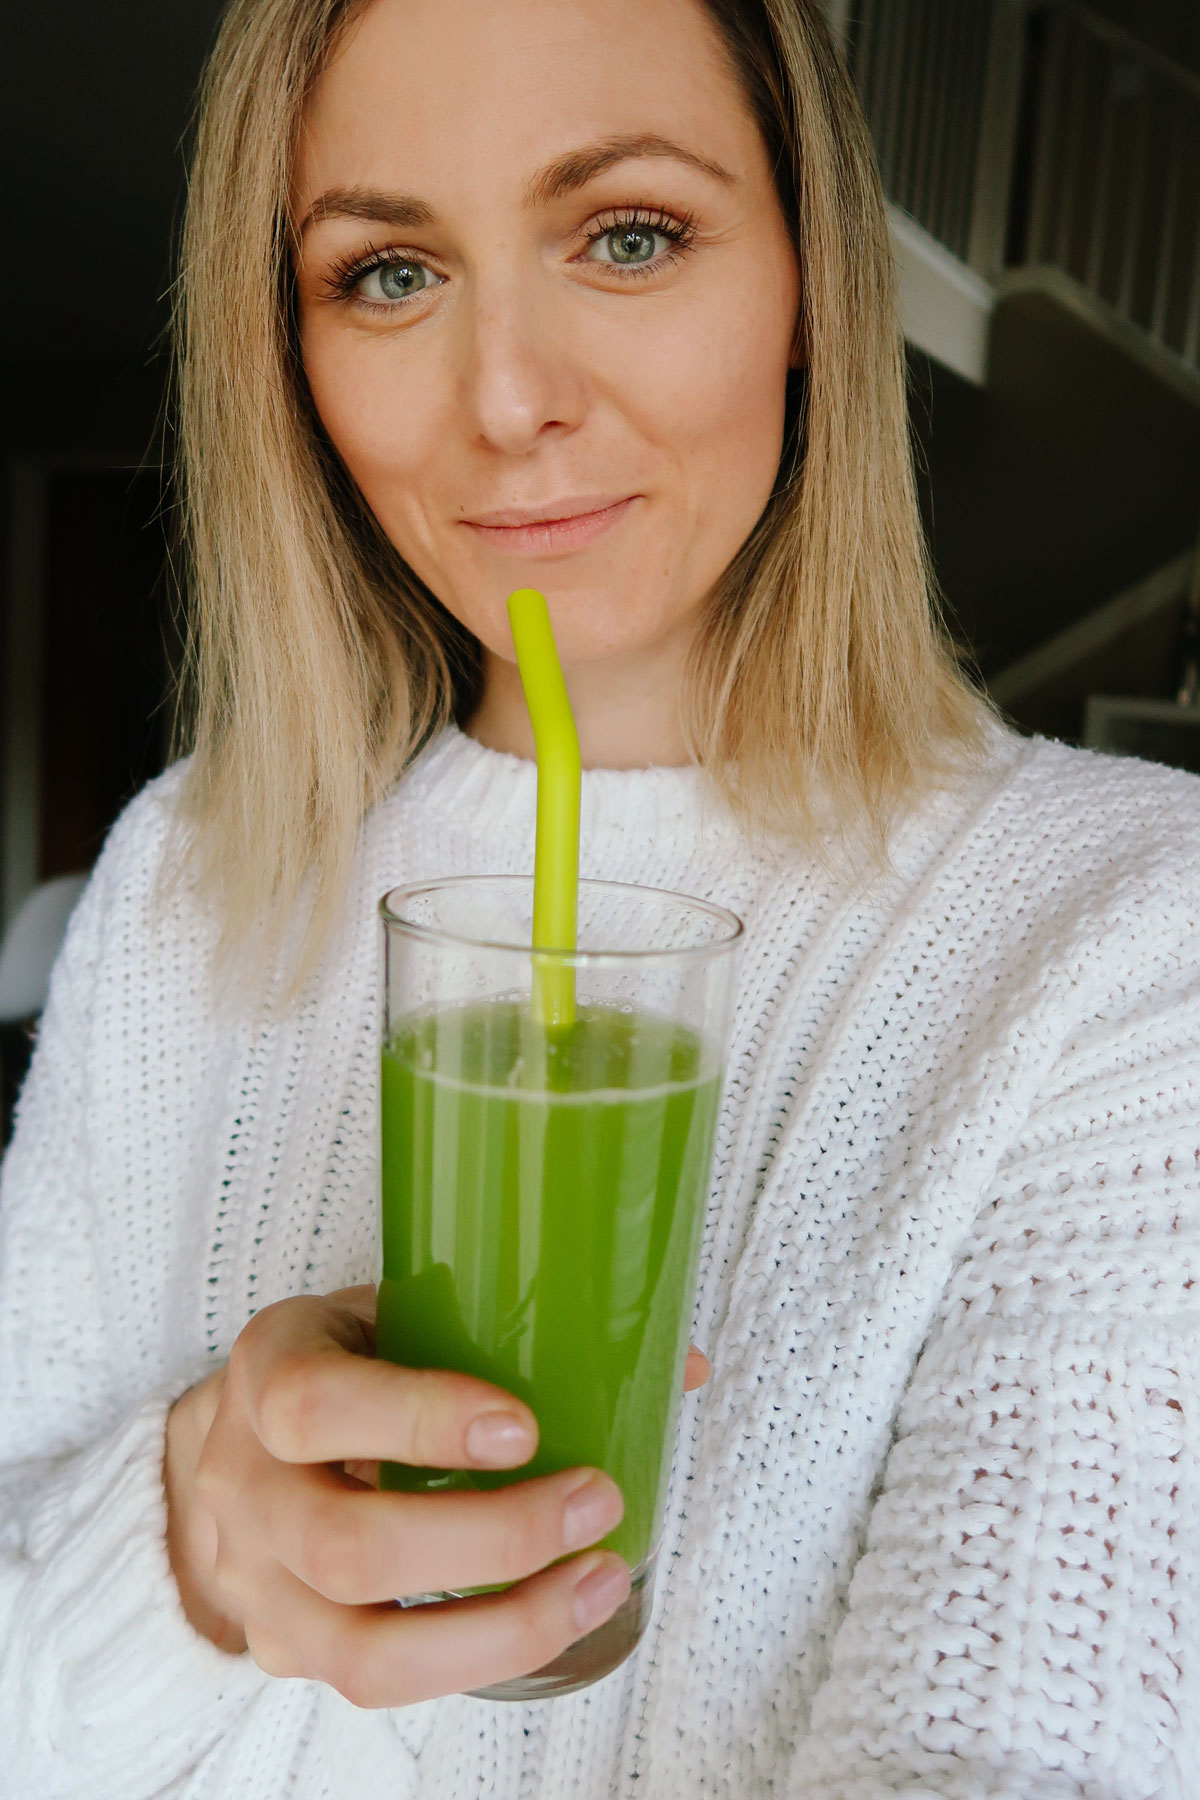 Everyone is drinking celery juice. What are the benefits?